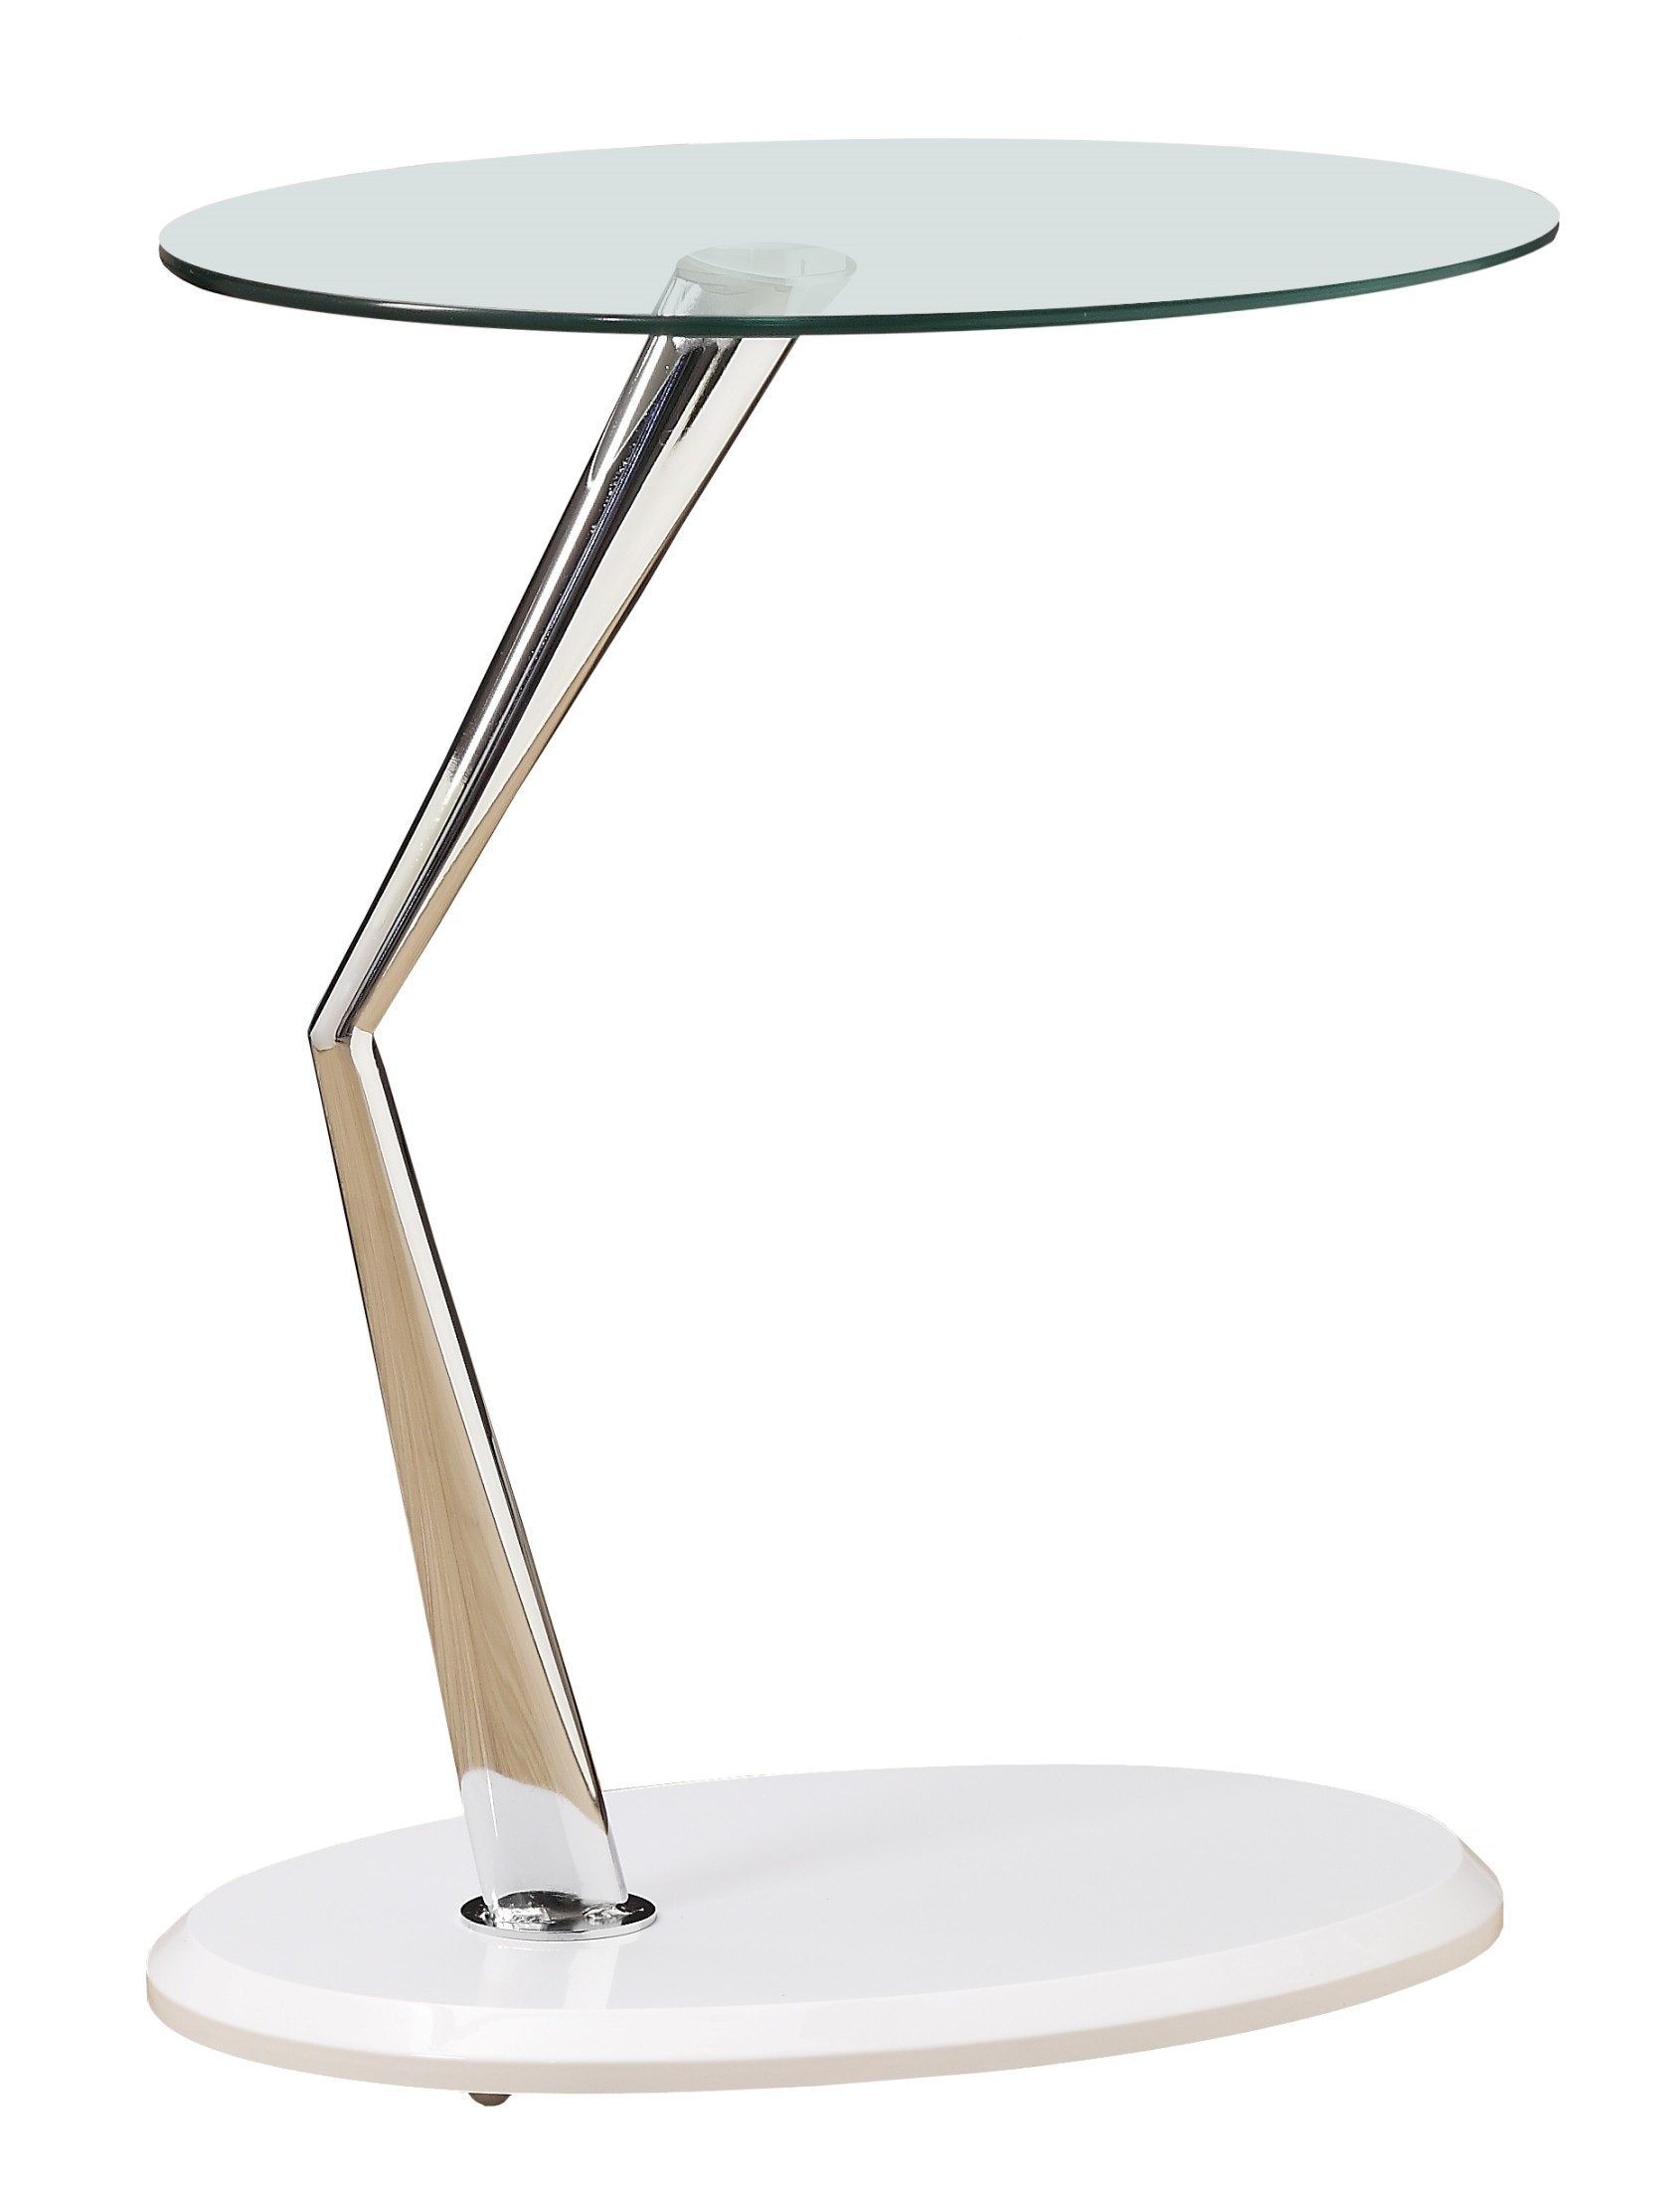 glossy white chrome metal accent table from monarch outdoor small mid century modern side threshold cover lewis wood acrylic nest tables the range bedside lamps home goods night